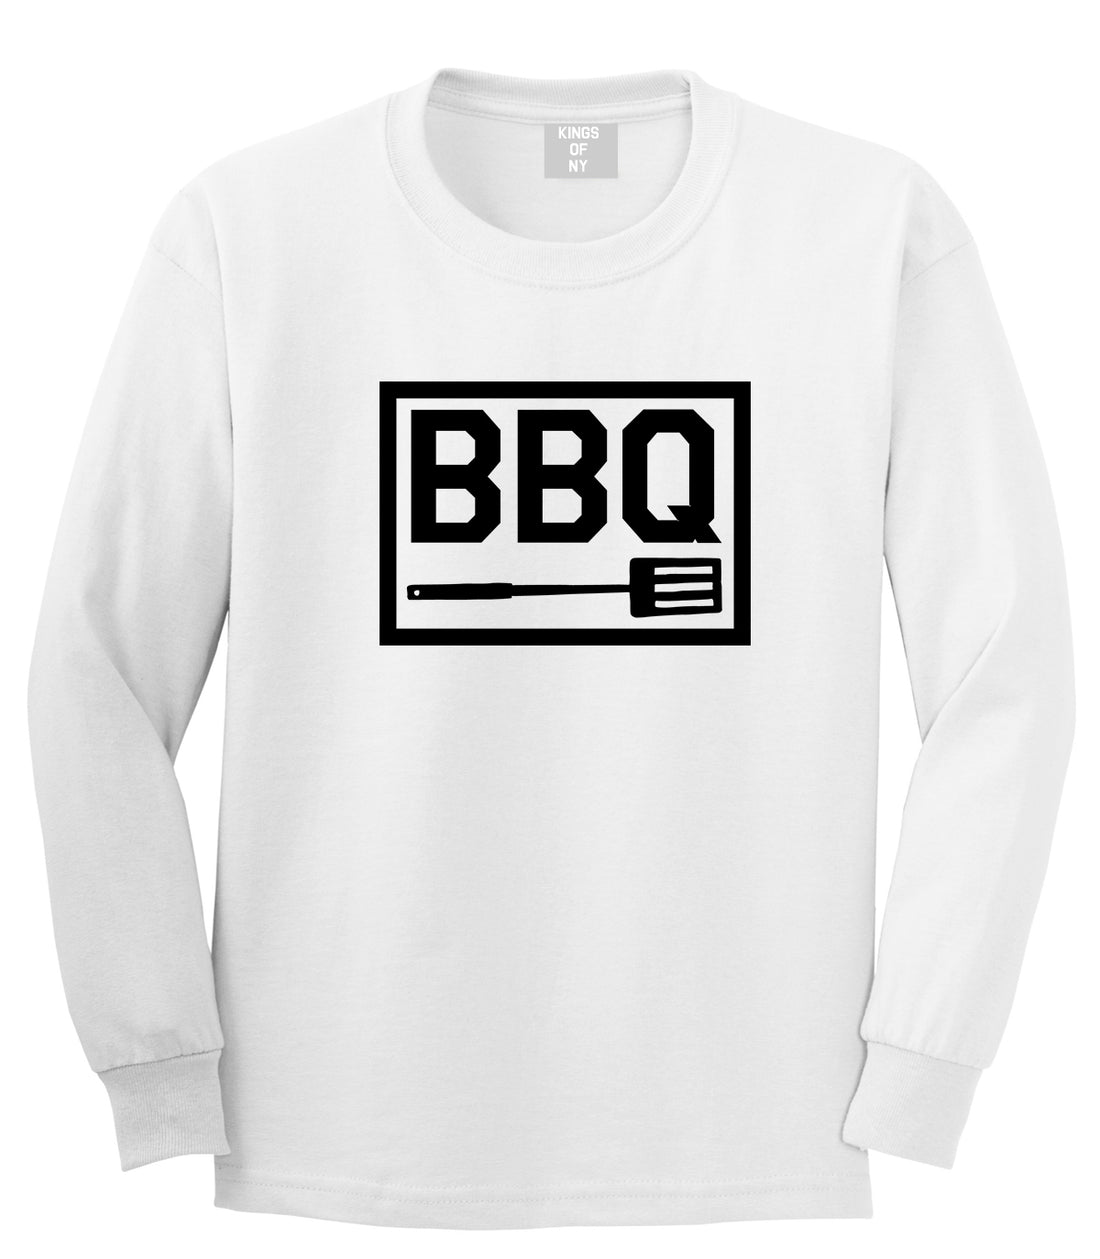 BBQ Barbecue Spatula White Long Sleeve T-Shirt by Kings Of NY